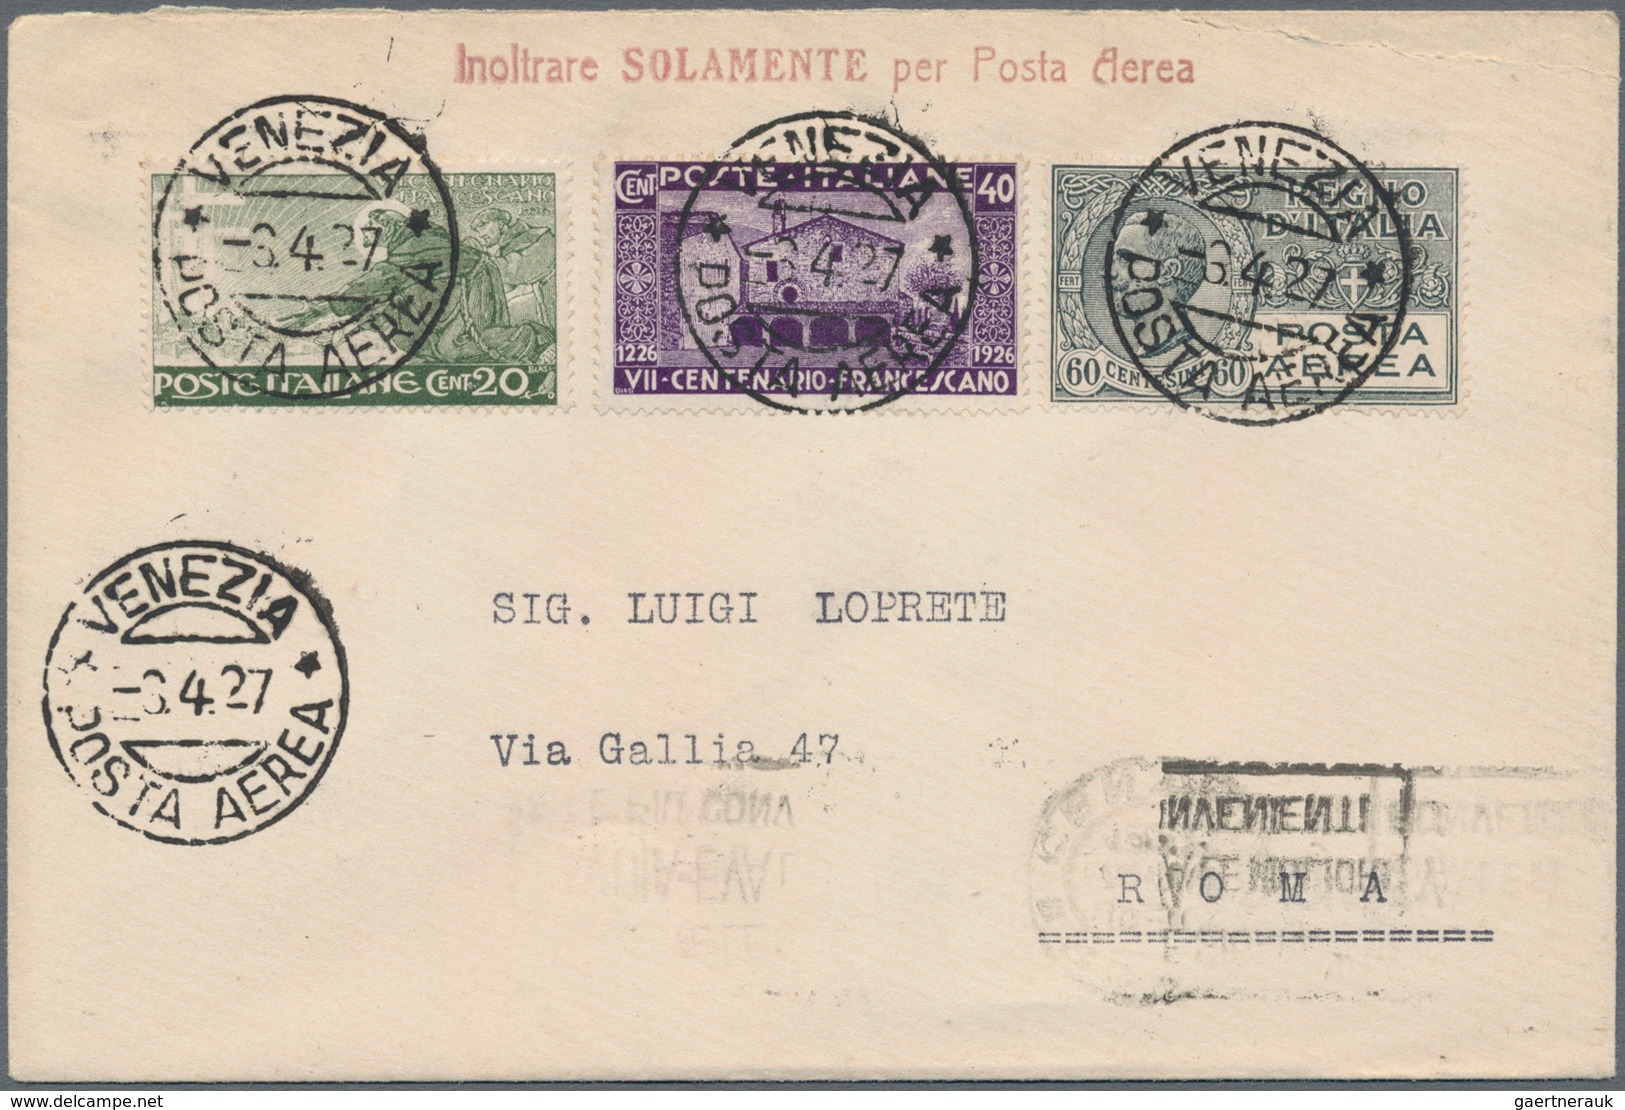 Flugpost Europa: 1927, Italy. Transadriatica Airmail Cover From "Venice 6.4.27" To Rome. Fine. - Autres - Europe